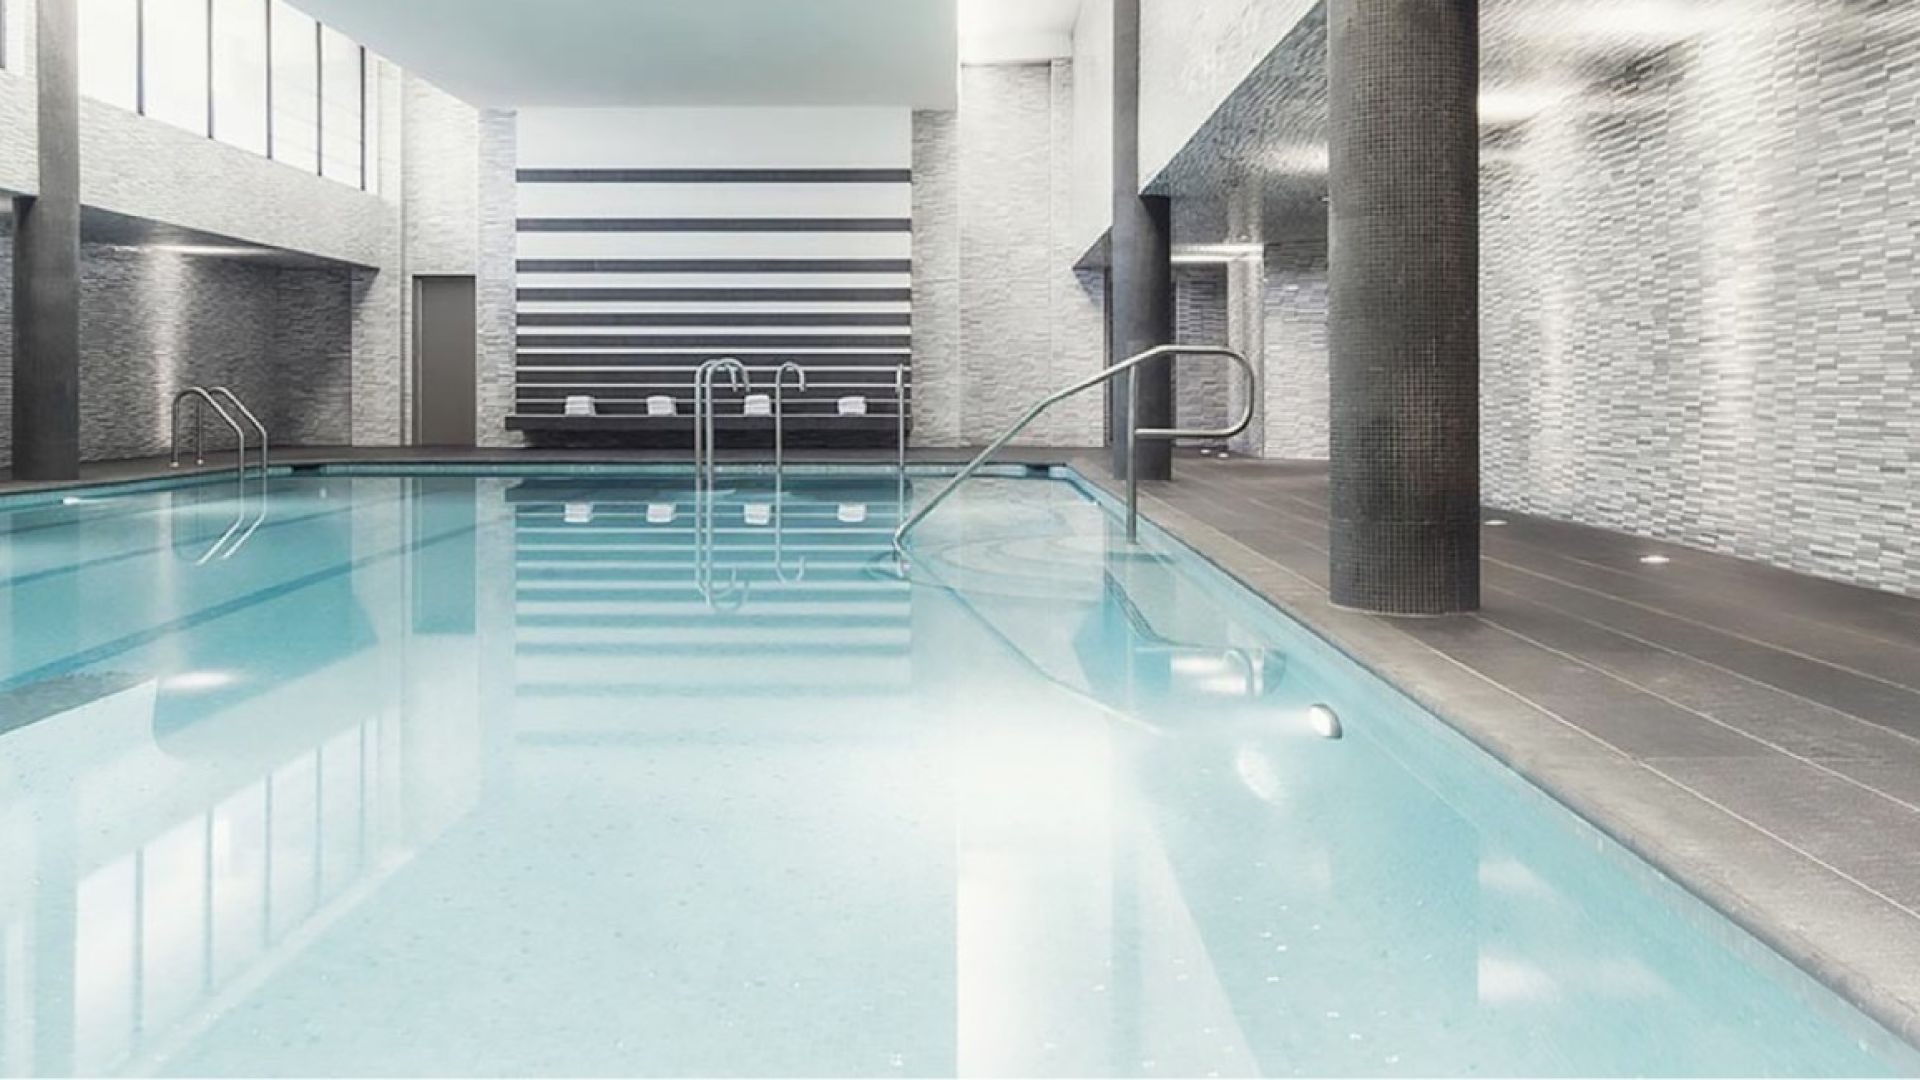 A Swimming Pool In A Building